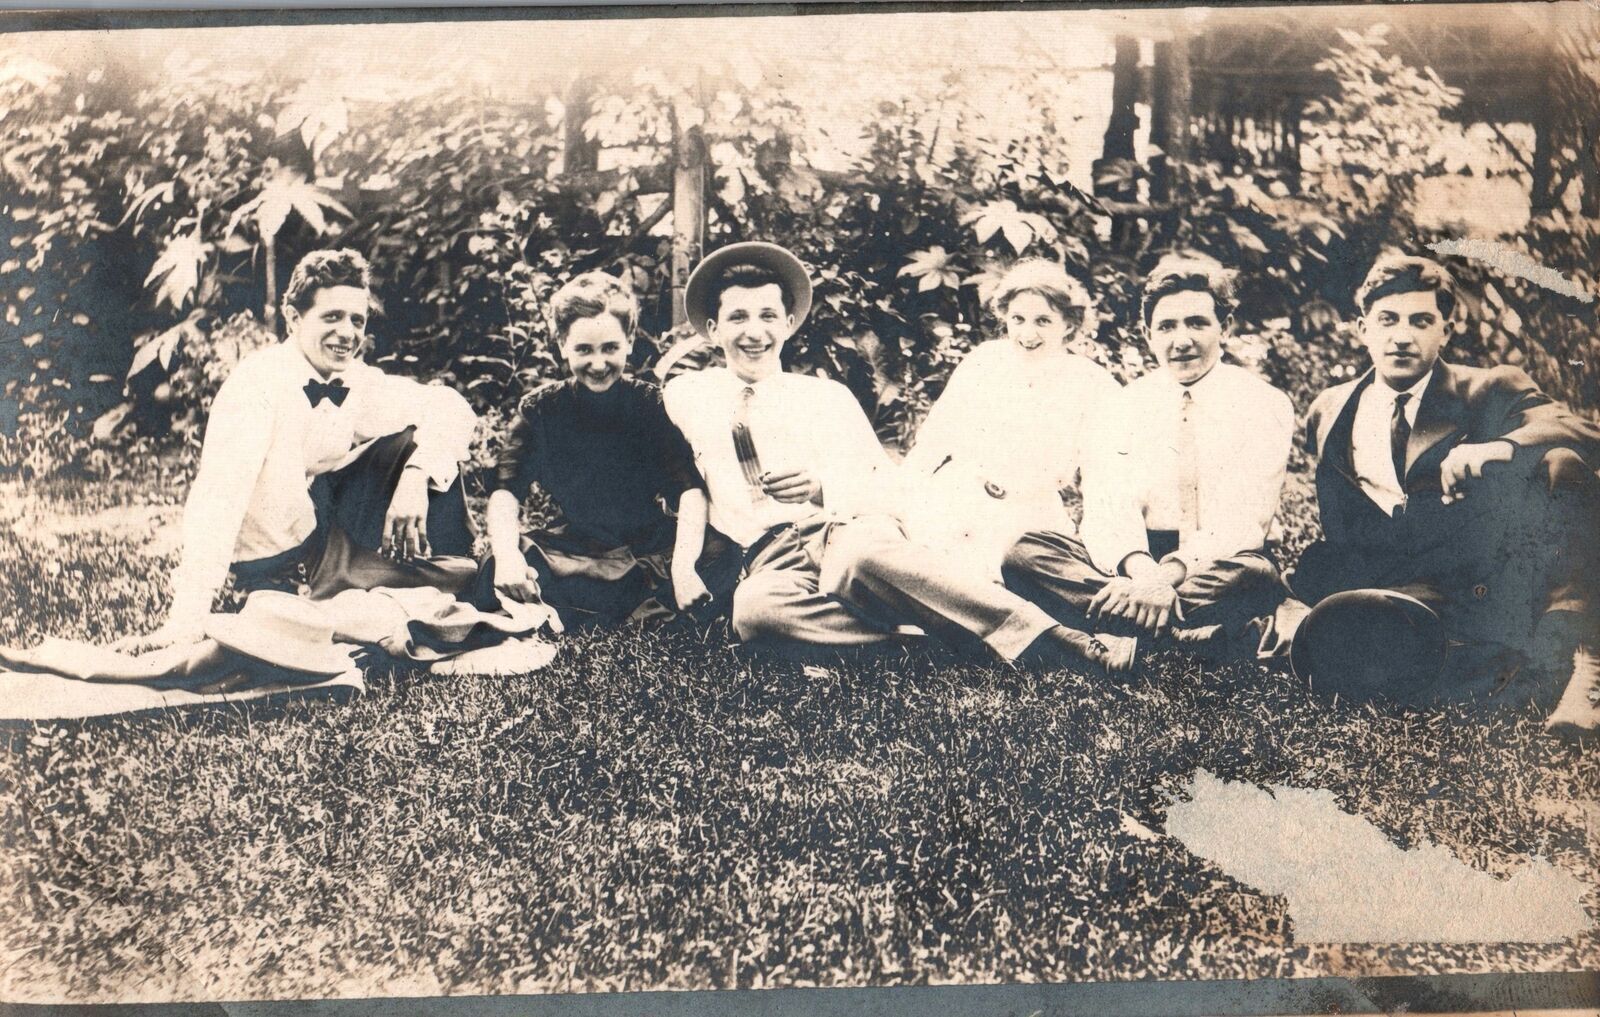 VINTAGE POSTCARD REAL PHOTO CARD GROUP OF YOUNG ADULTS ON LAWN c. 1910-1915